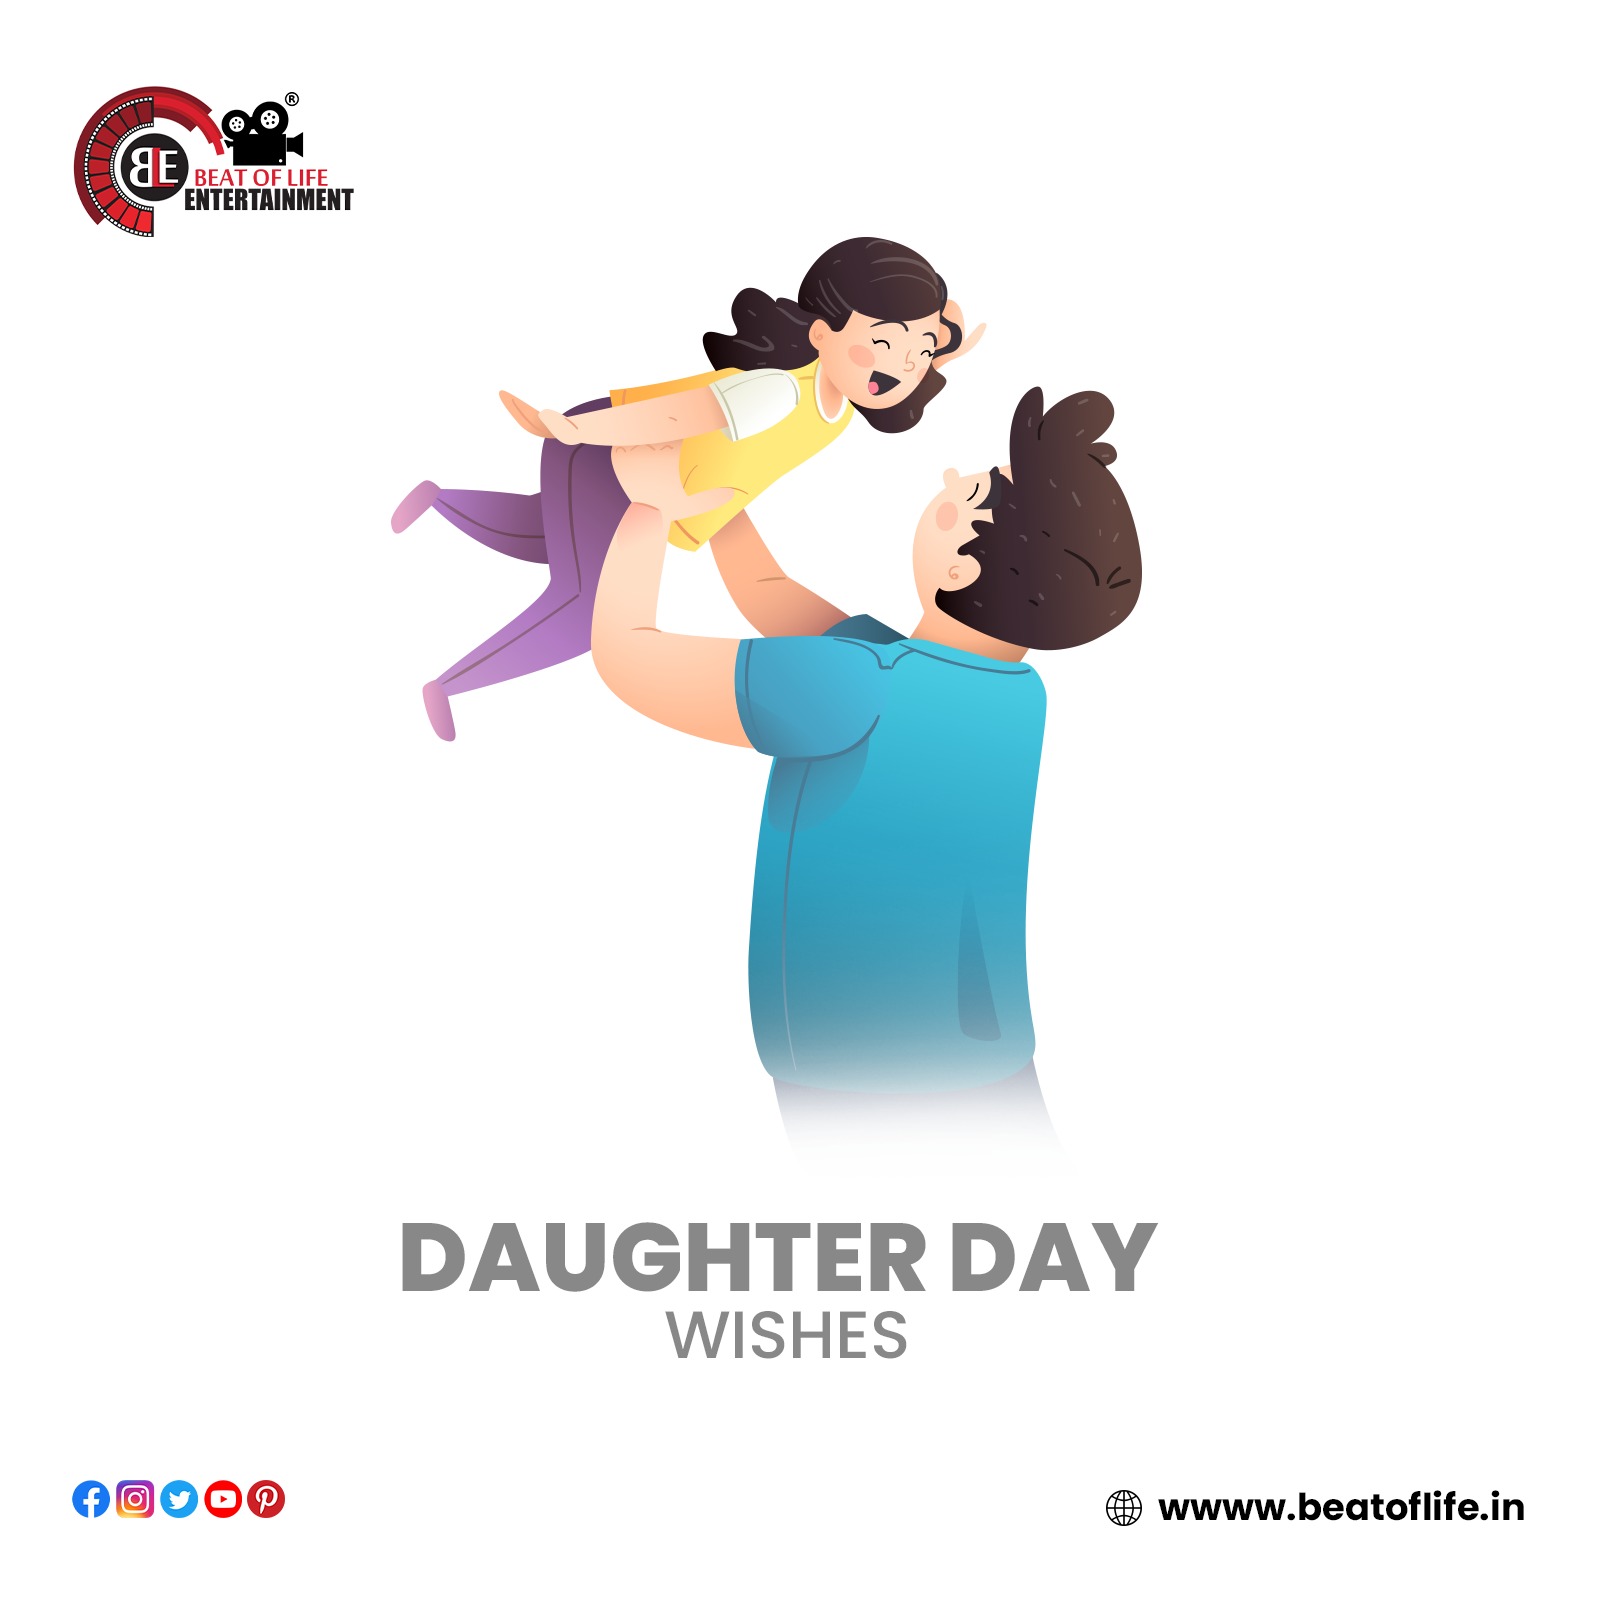 Daughter's Day wishes